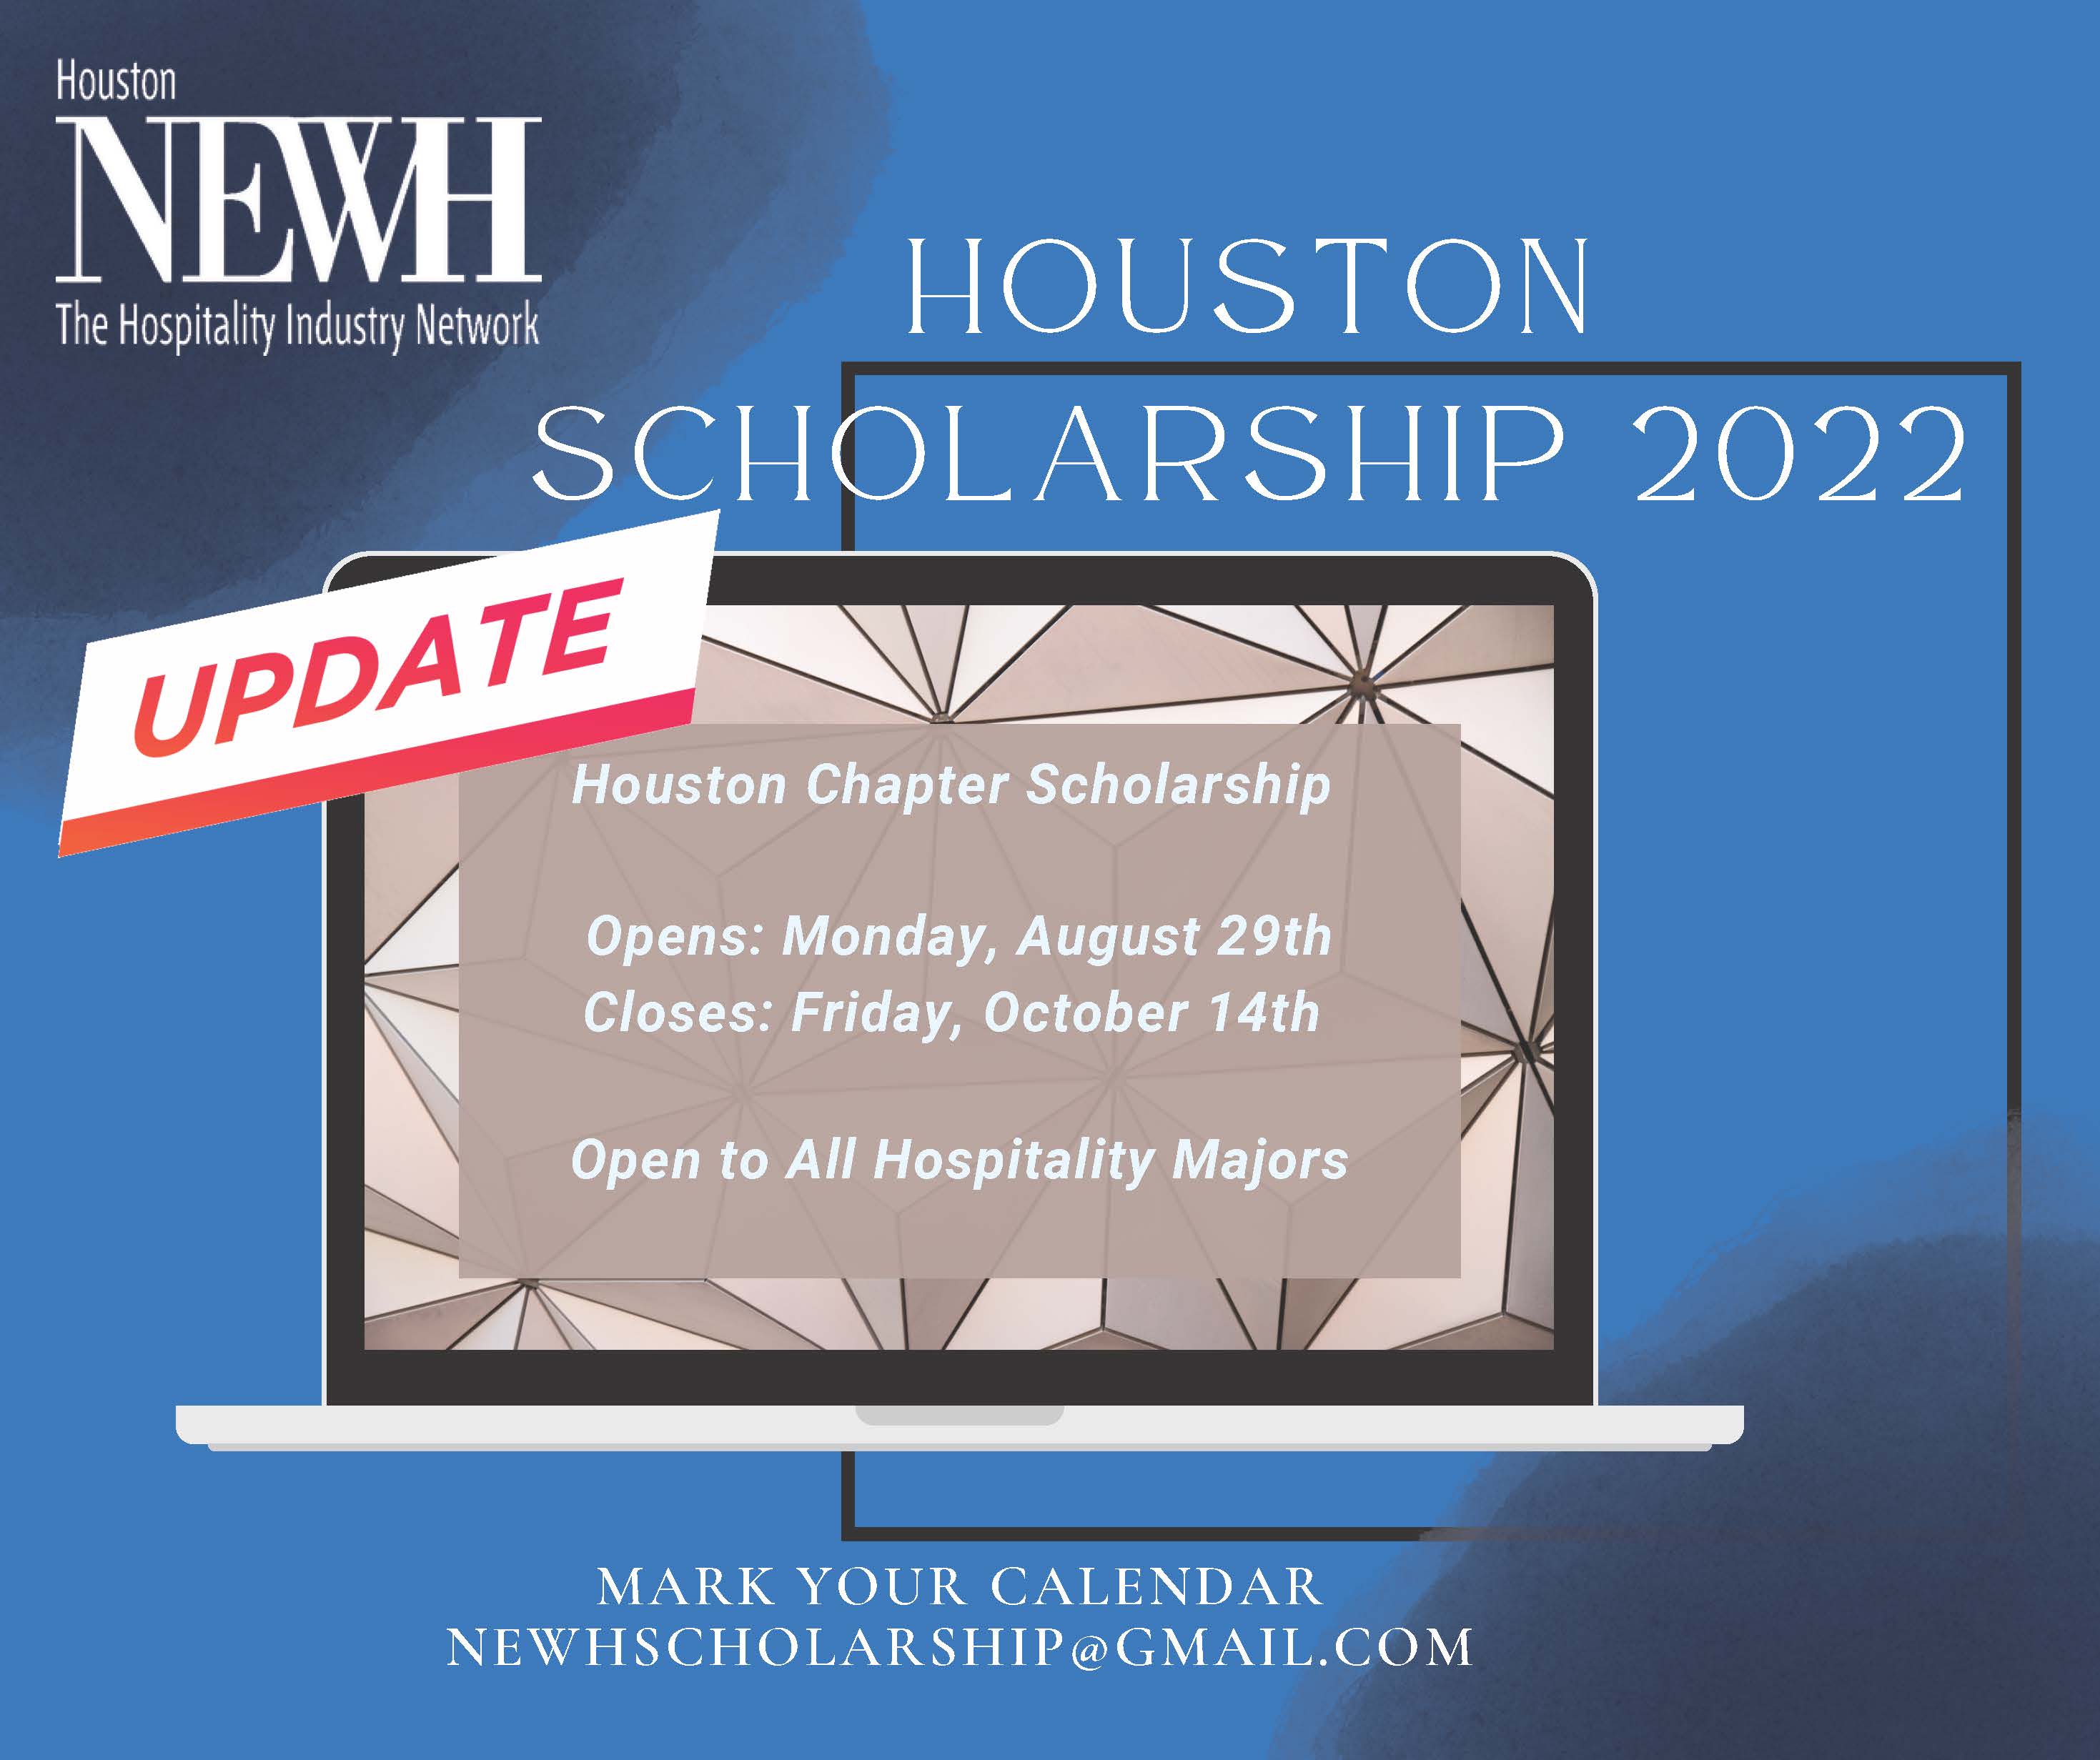 Call for Scholarship Applicants